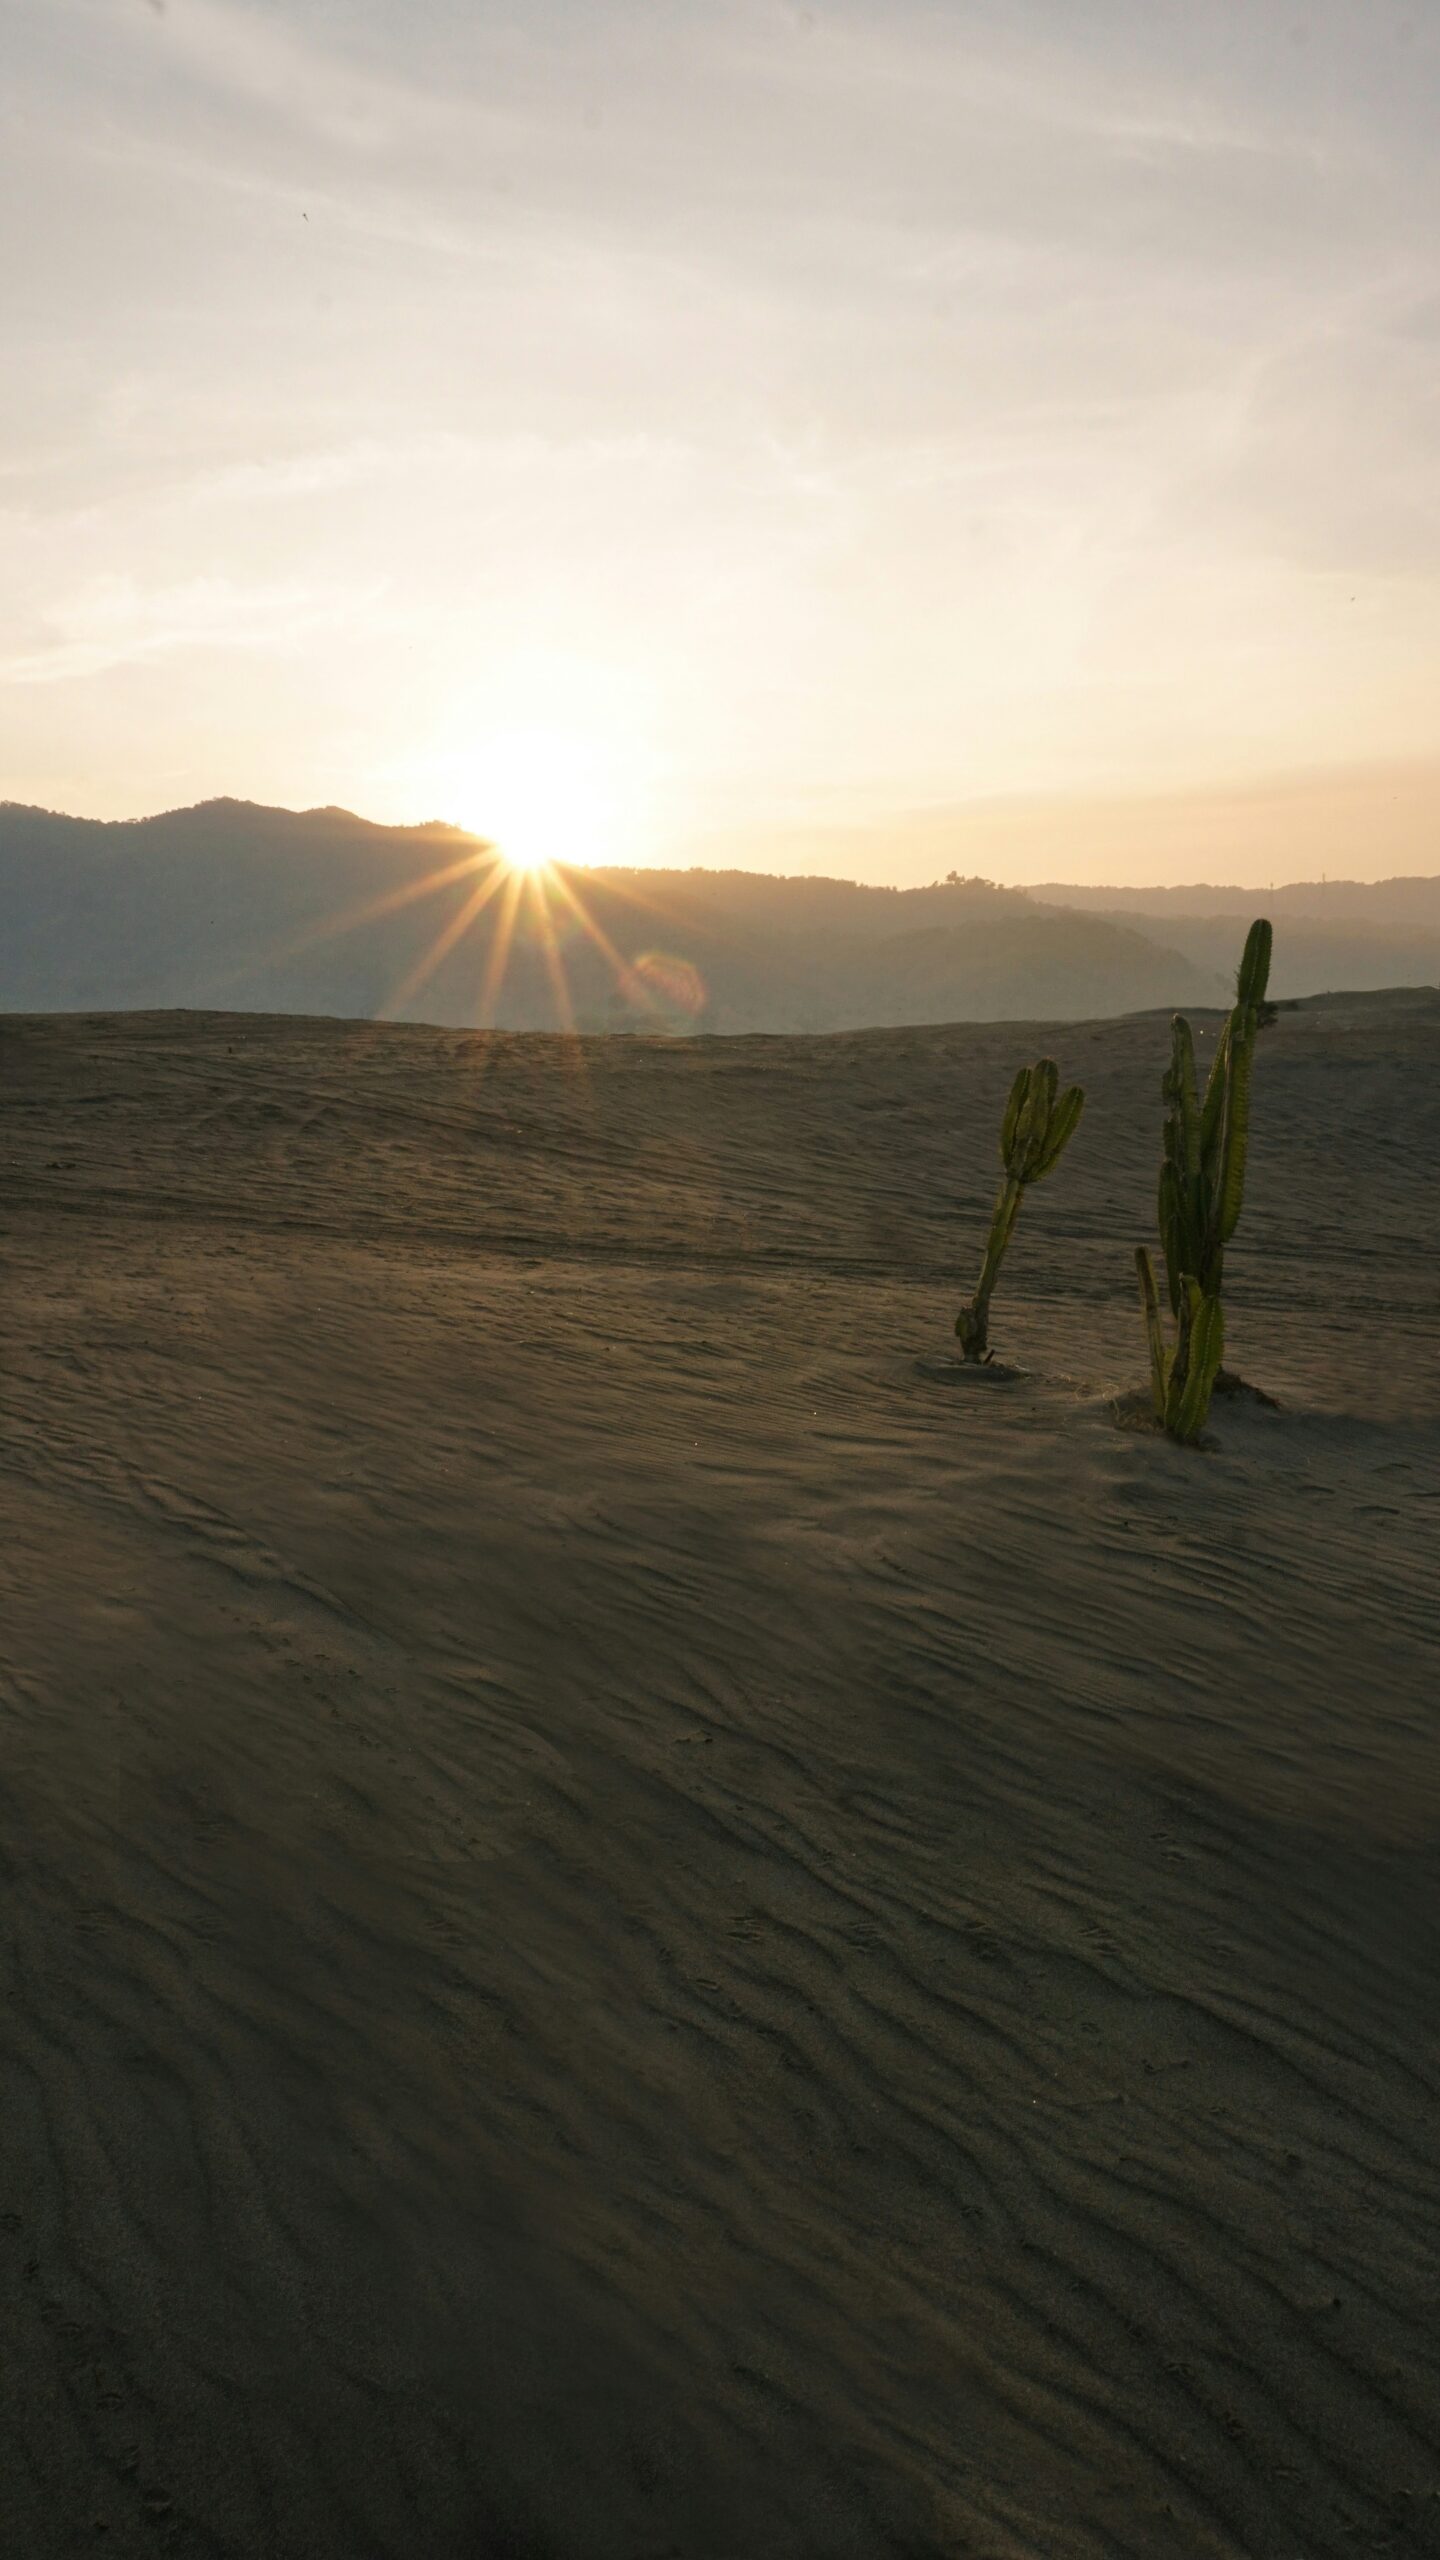 the sun is setting over the desert with a cactus in the foreground